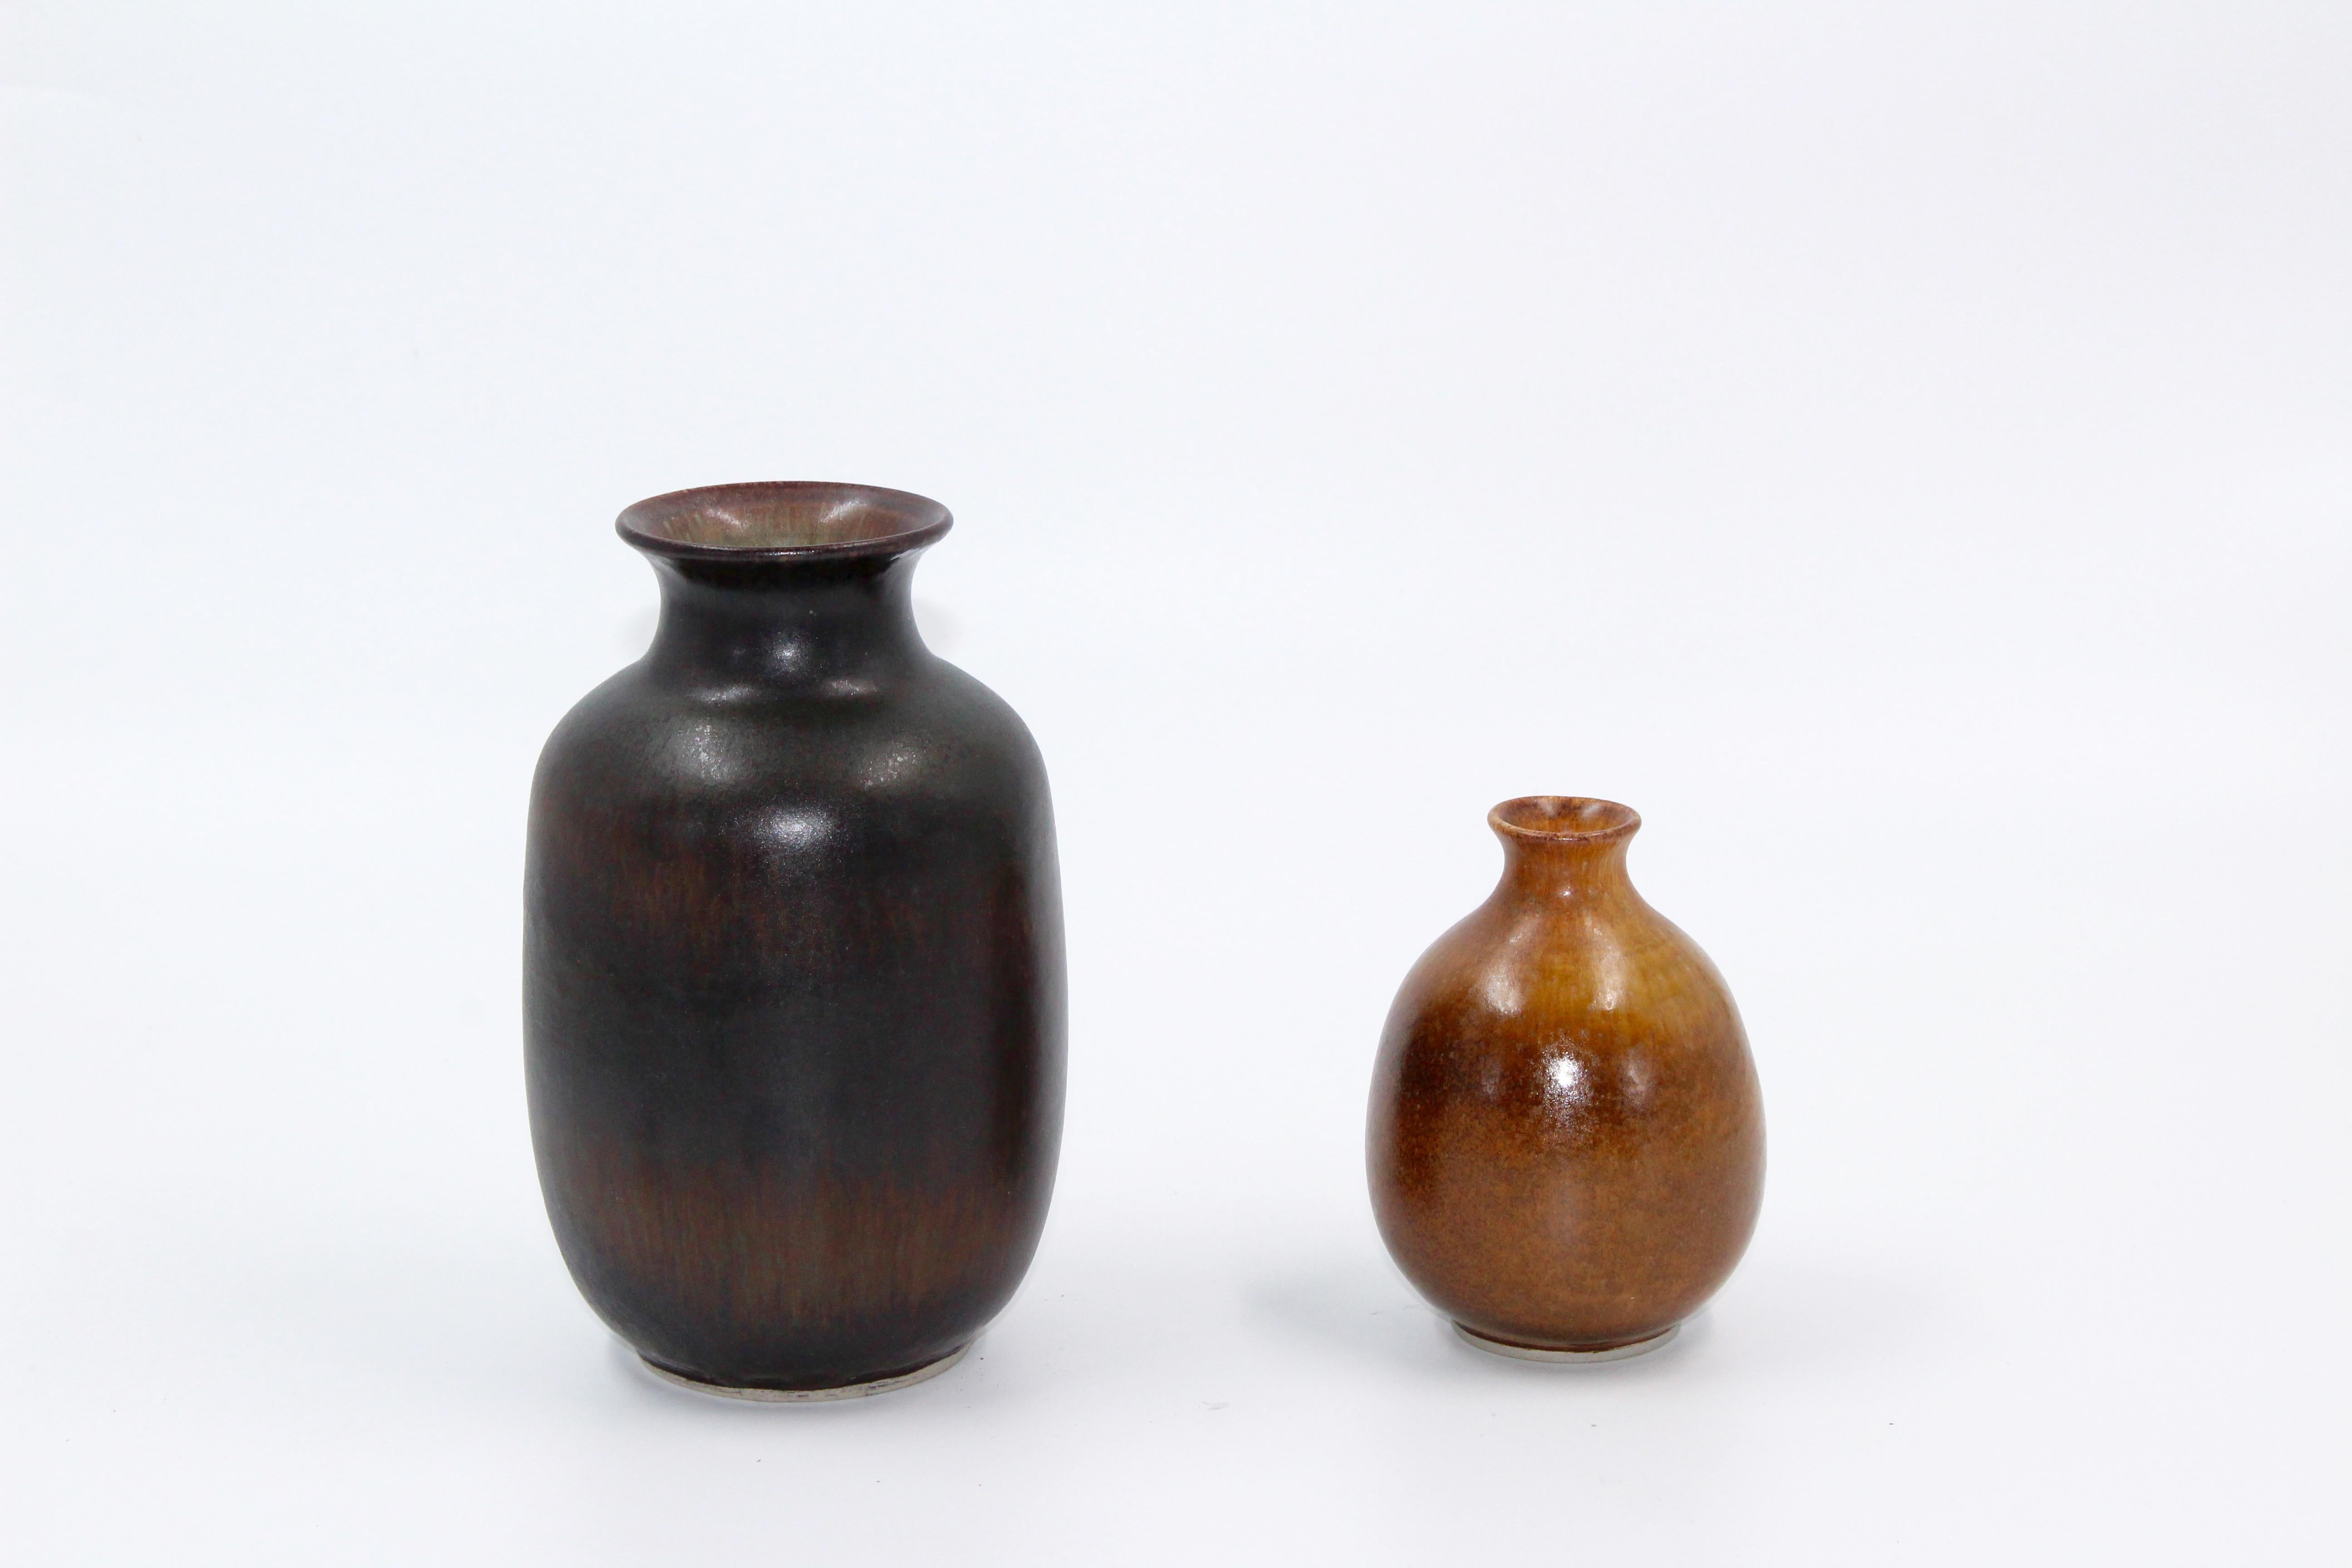 A set of two ceramic vases by Egon Larsson, potter at Höganäs Keramik. The vases are likely made in the 1950s and both are in very good vintage condition. The large one measures 17 x 10 cm and the maller 11 x 7 cm.